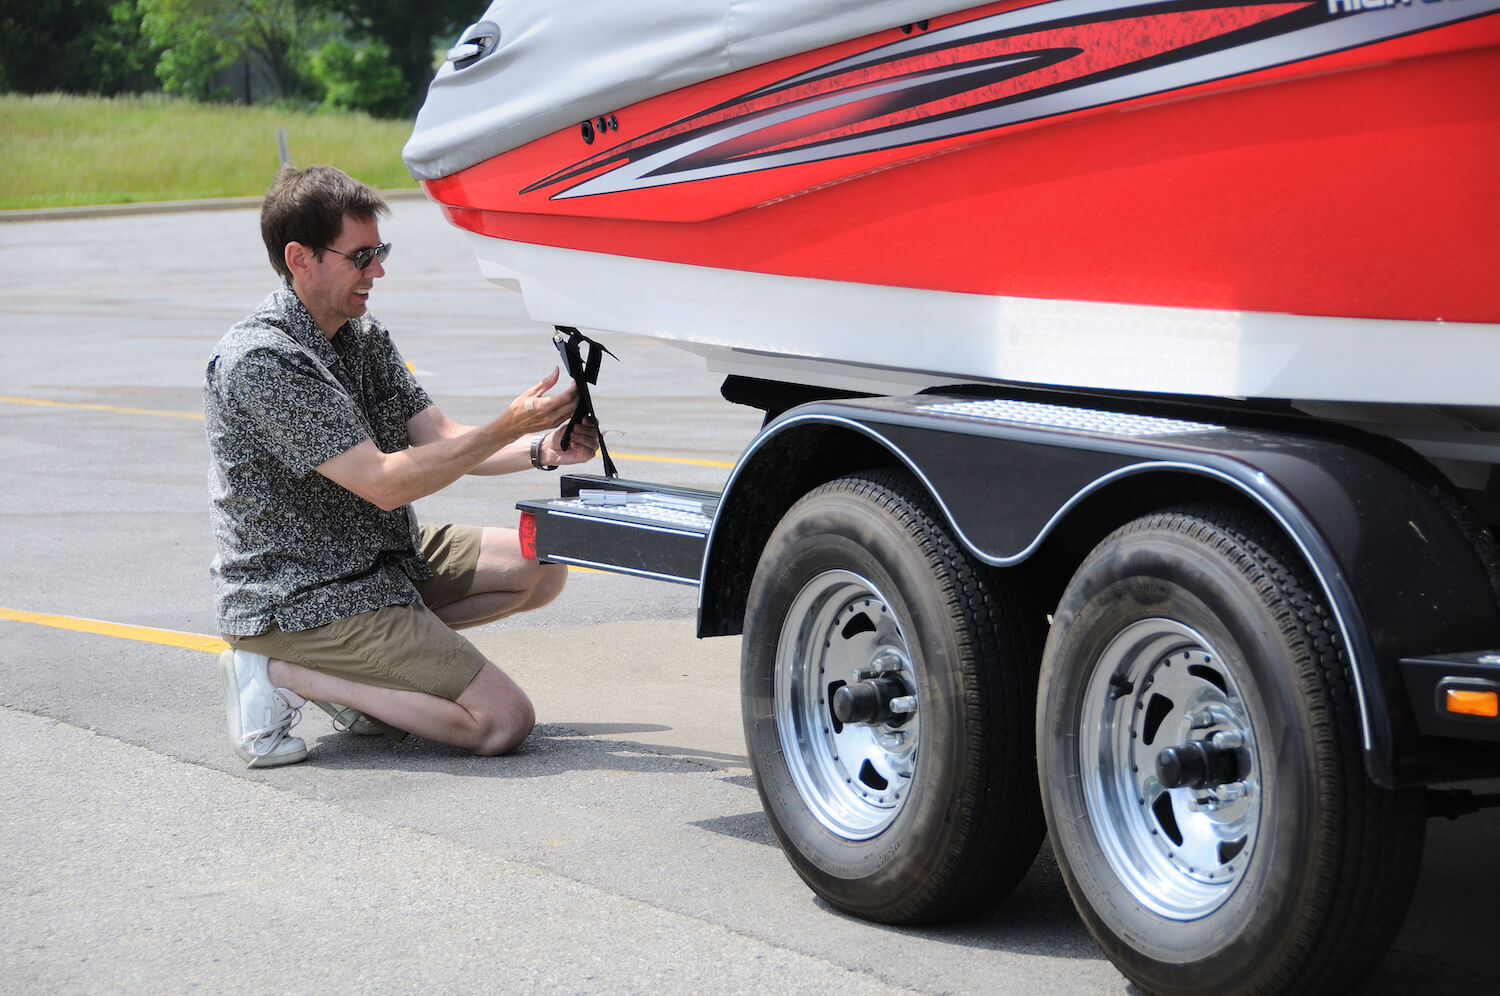 secure-rear-guide-to-trailering-a-boat-09-2022 